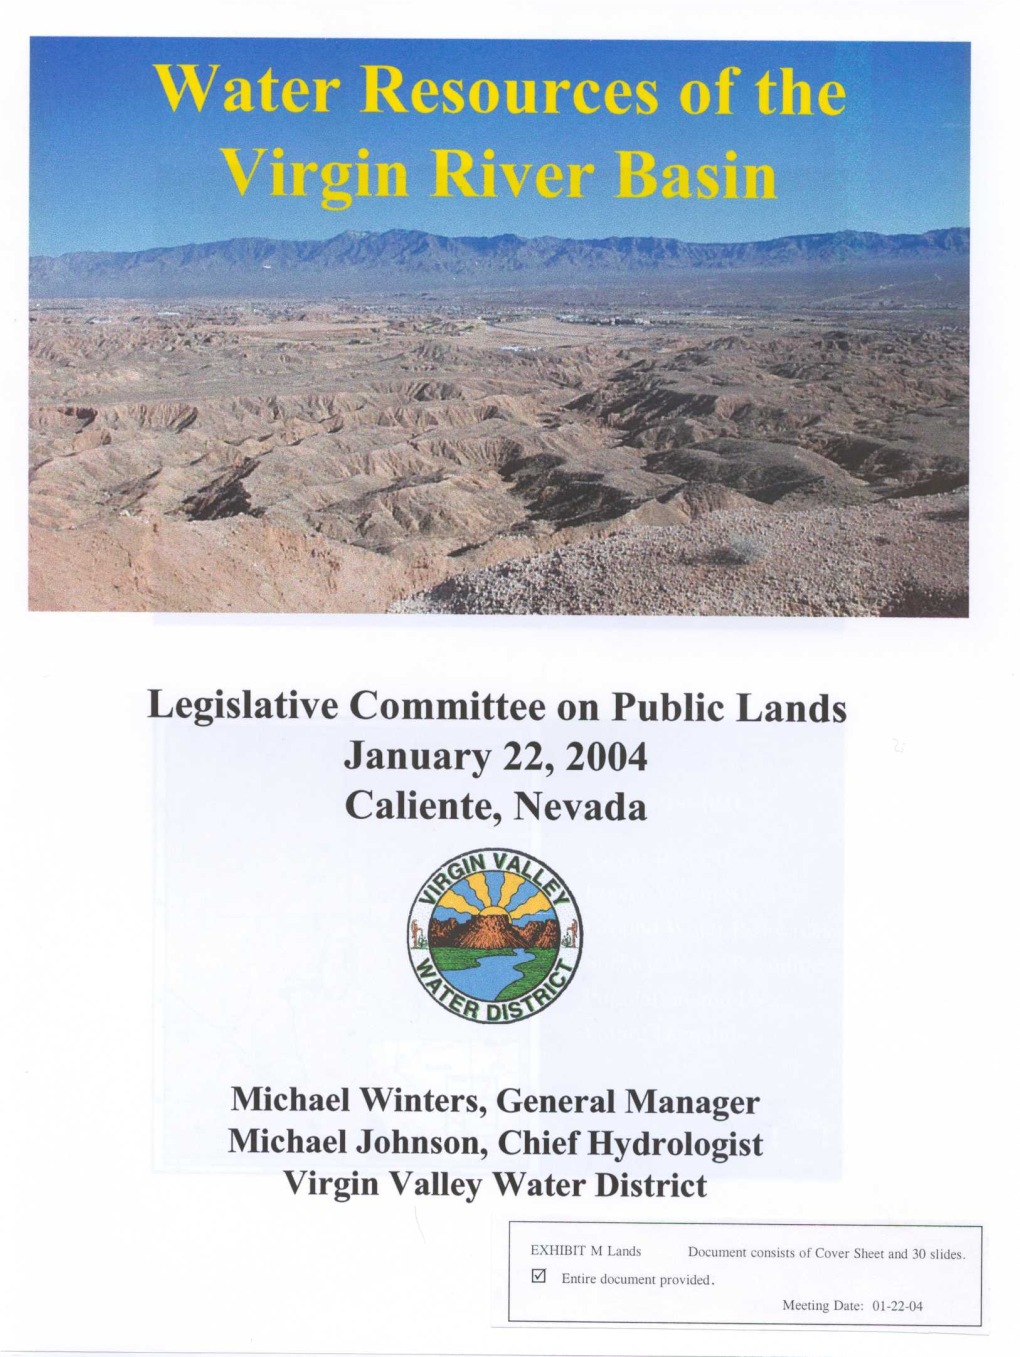 Hydrology of the Virgin River Basin